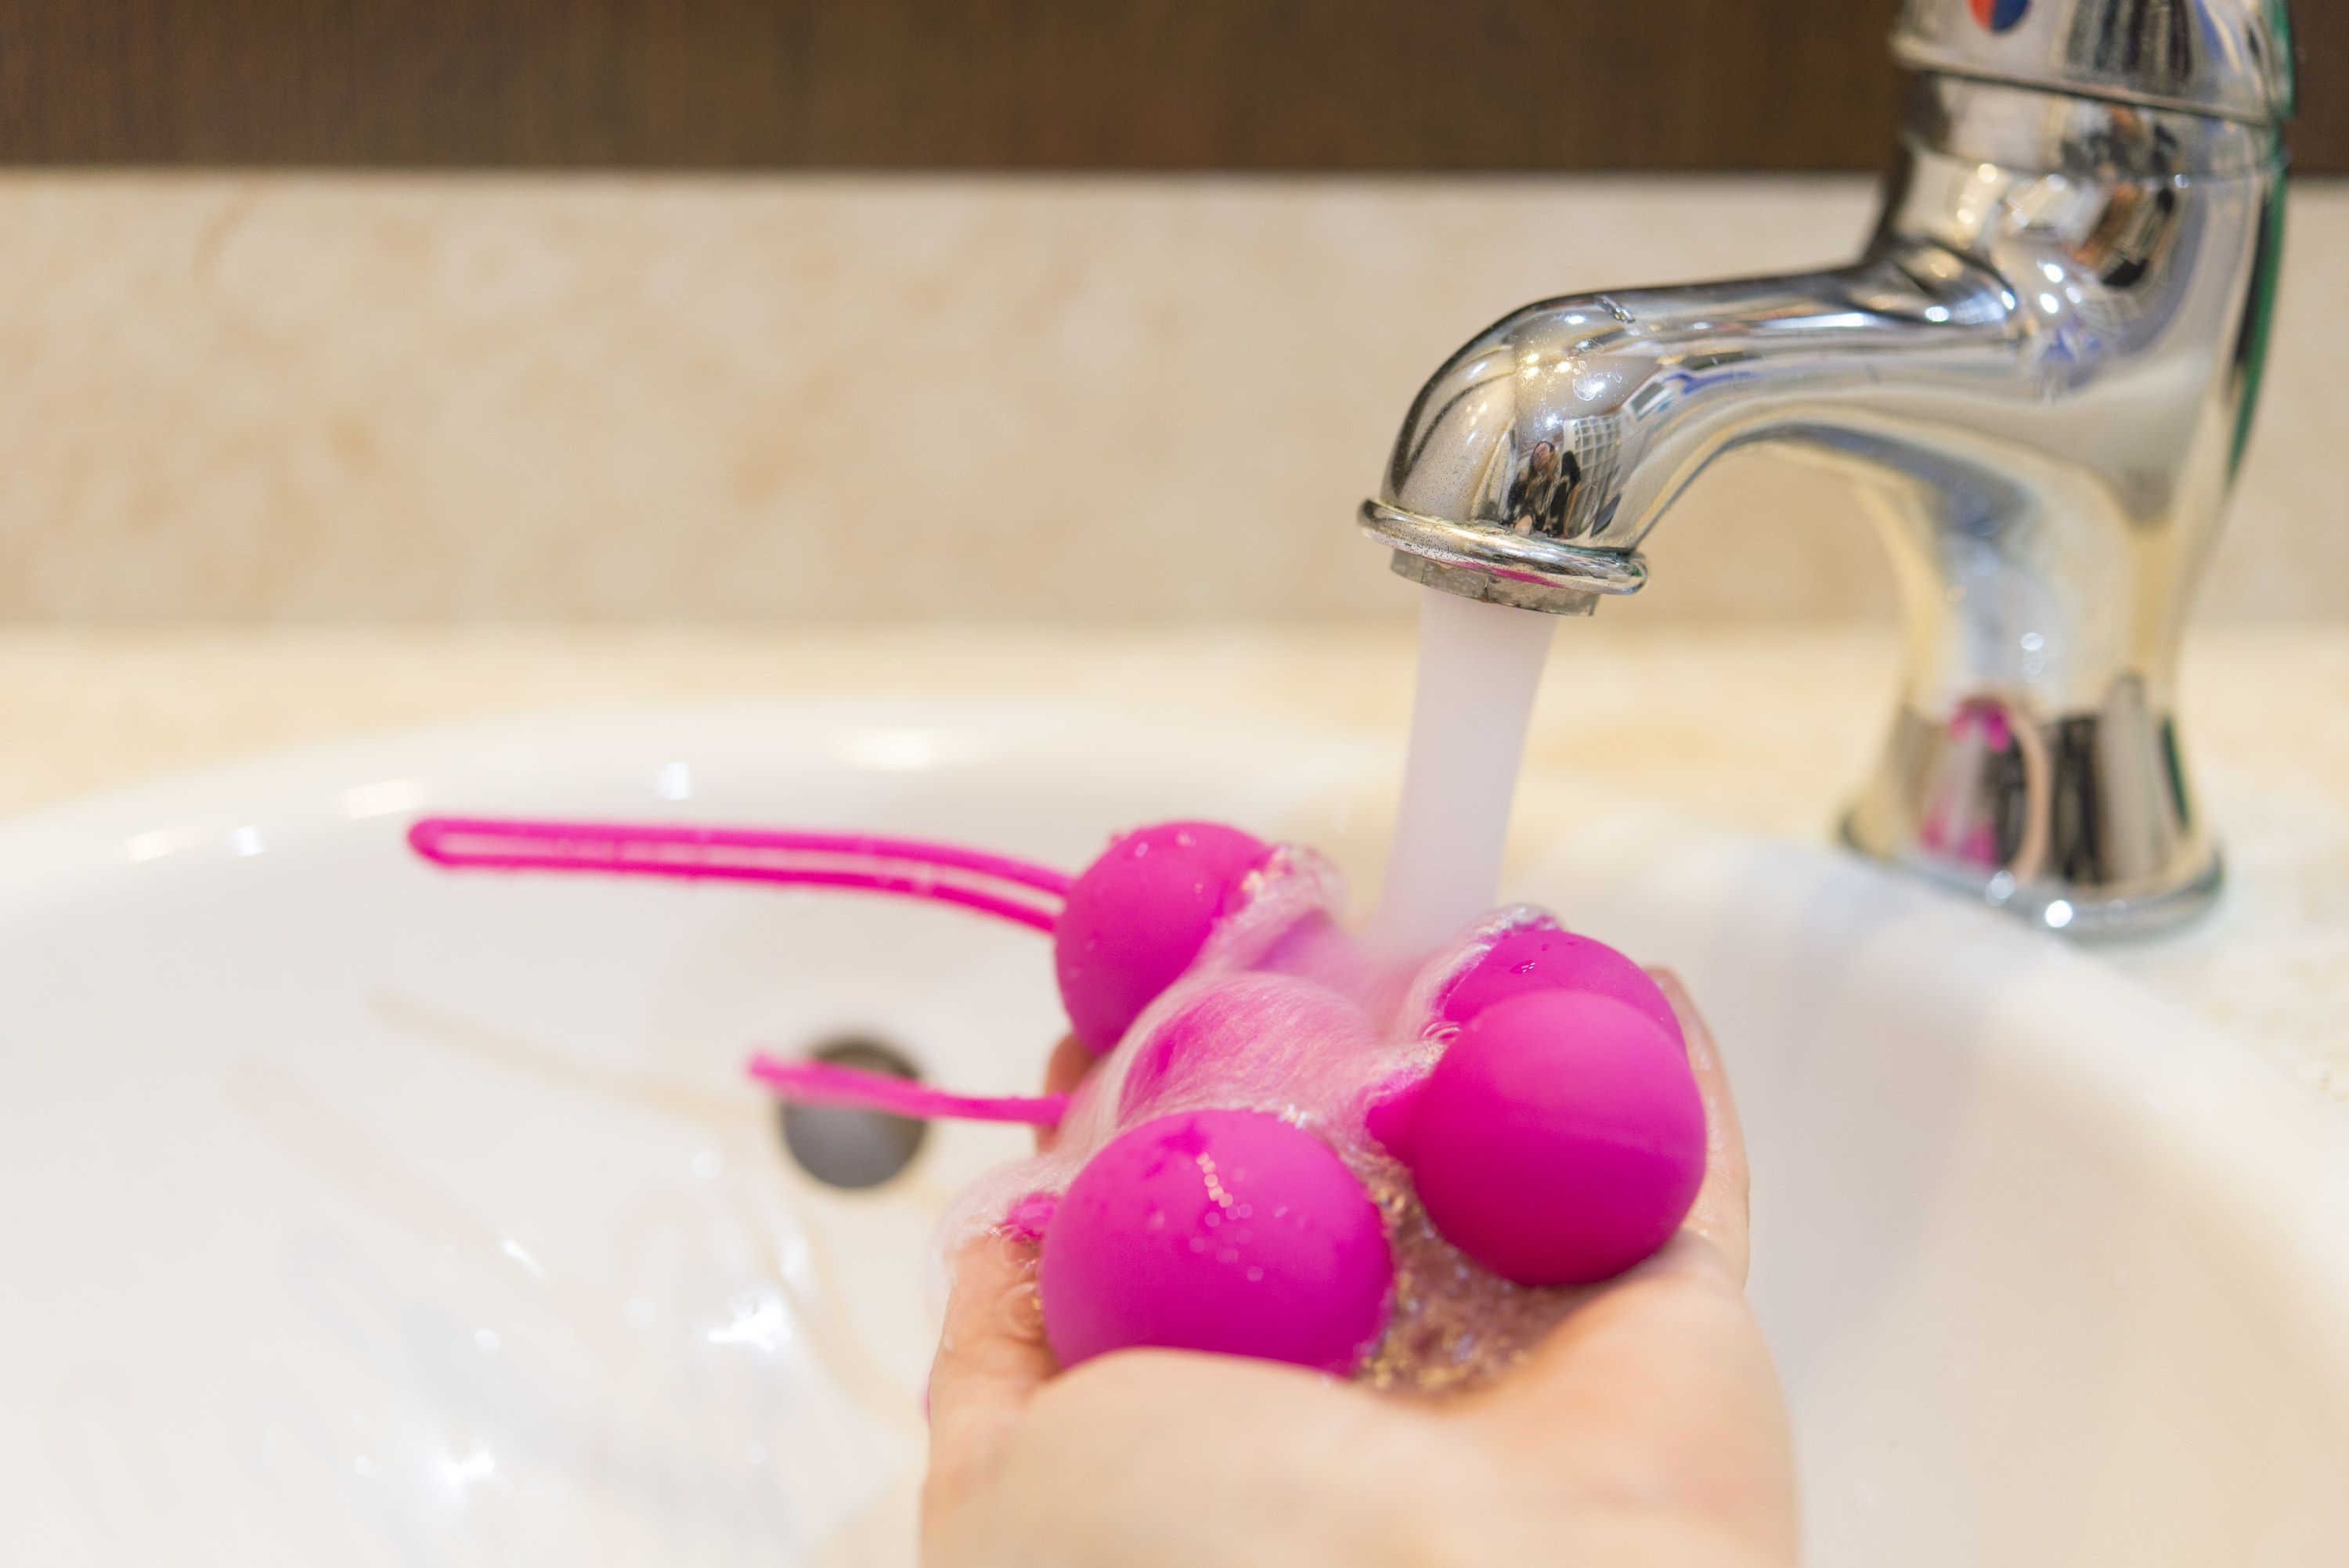 A hand holding sex toys under a faucet to clean them